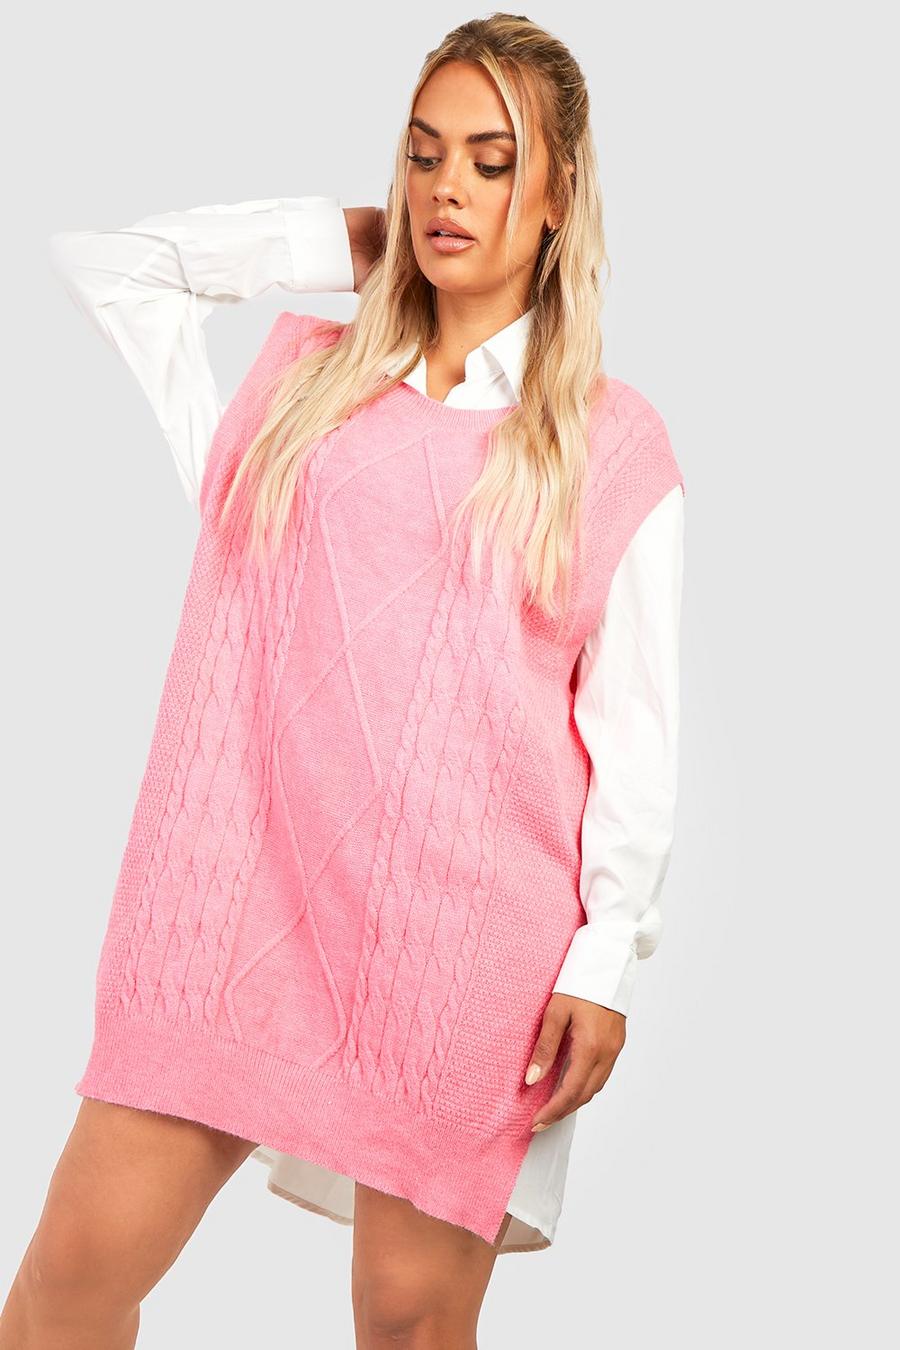 Hot pink Plus Knitted Tank Top 2 In 1 Shirt Dress